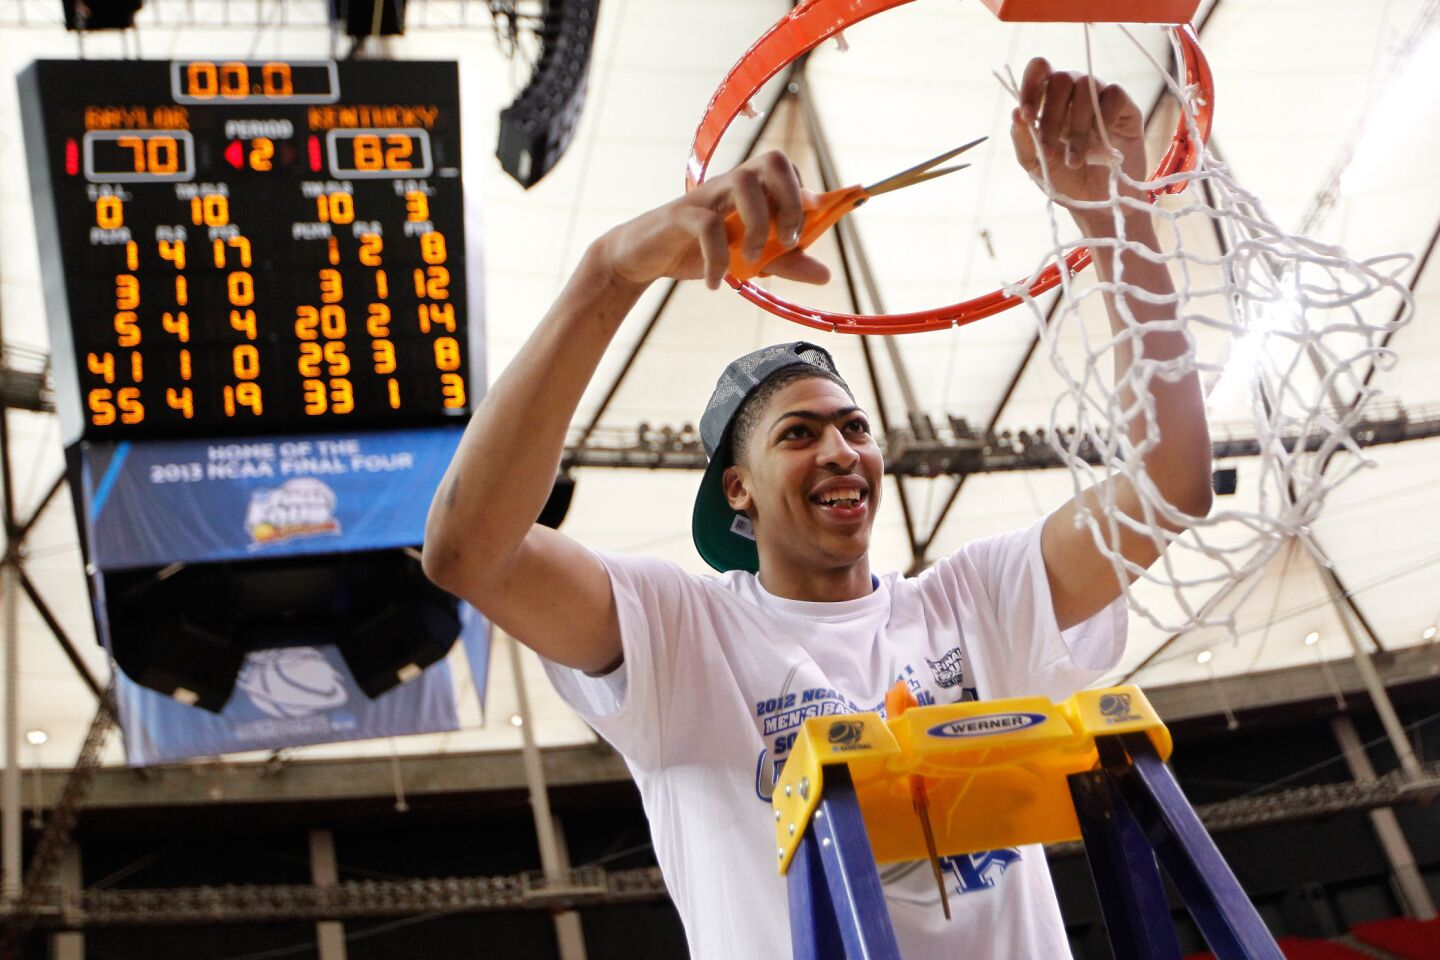 Anthony Davis cuts down the net after Kentucky defeated the Baylor 82-70 in the NCAA tournament South Regional final on March 25, 2012, in Atlanta.